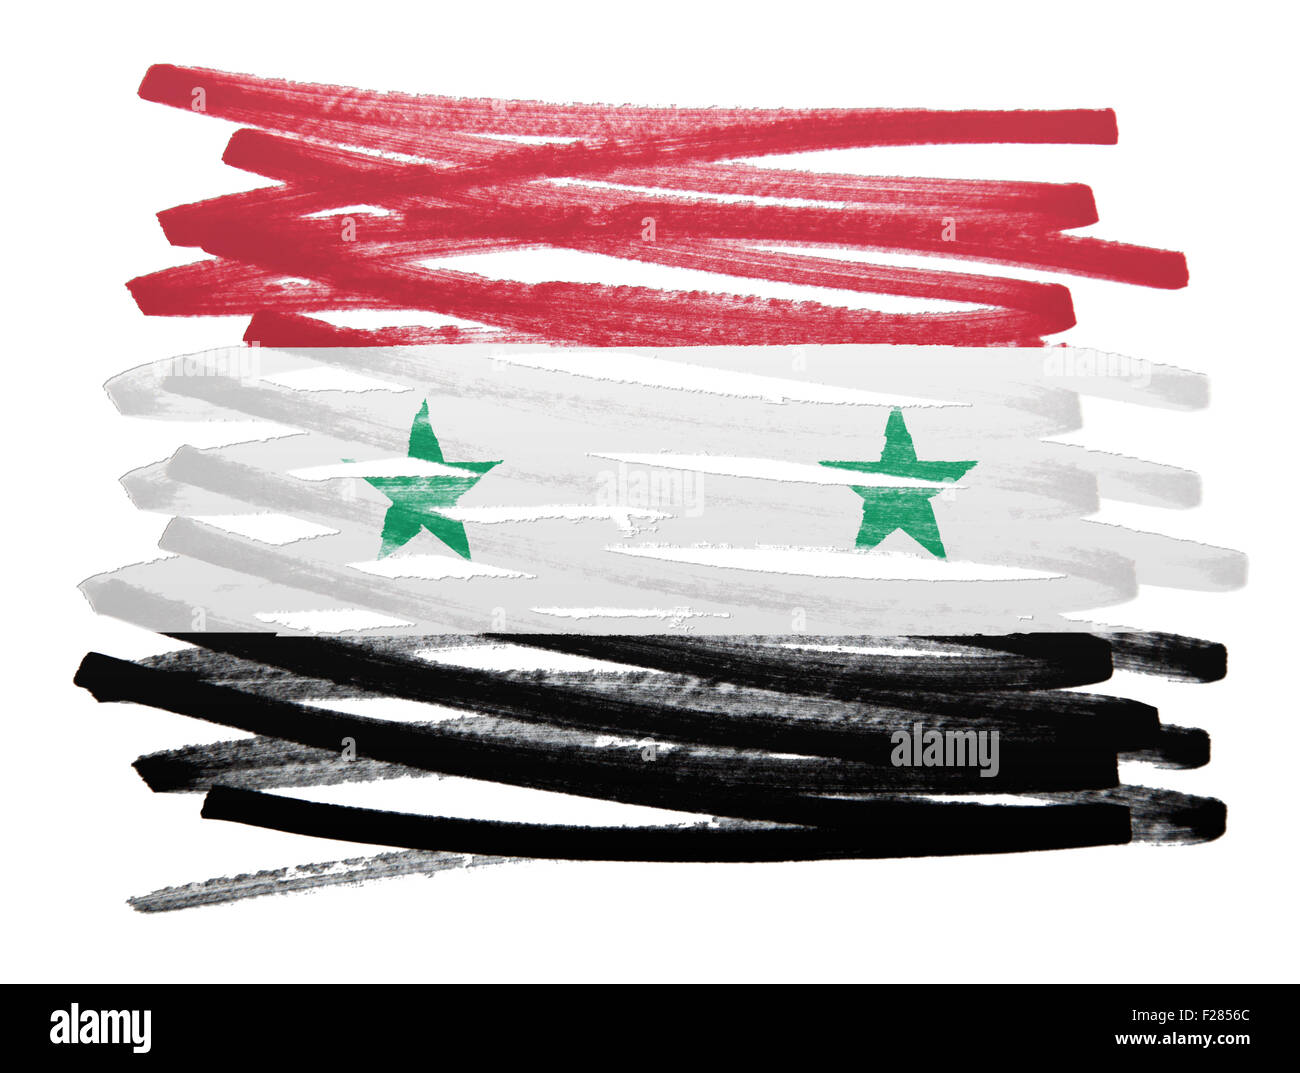 Flag illustration made with pen - Syria Stock Photo